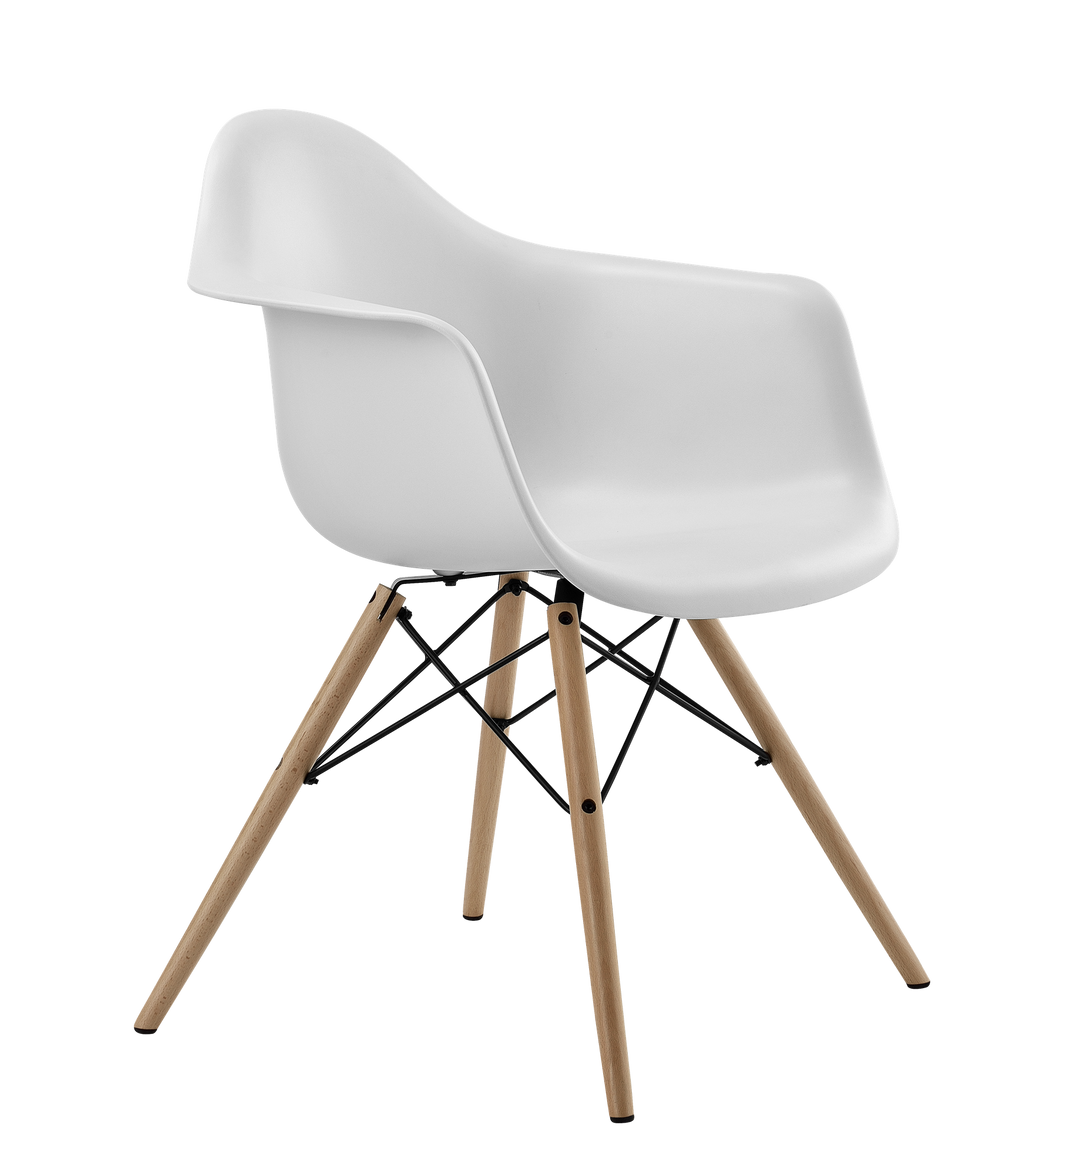 Retro molded chair with arms -  White